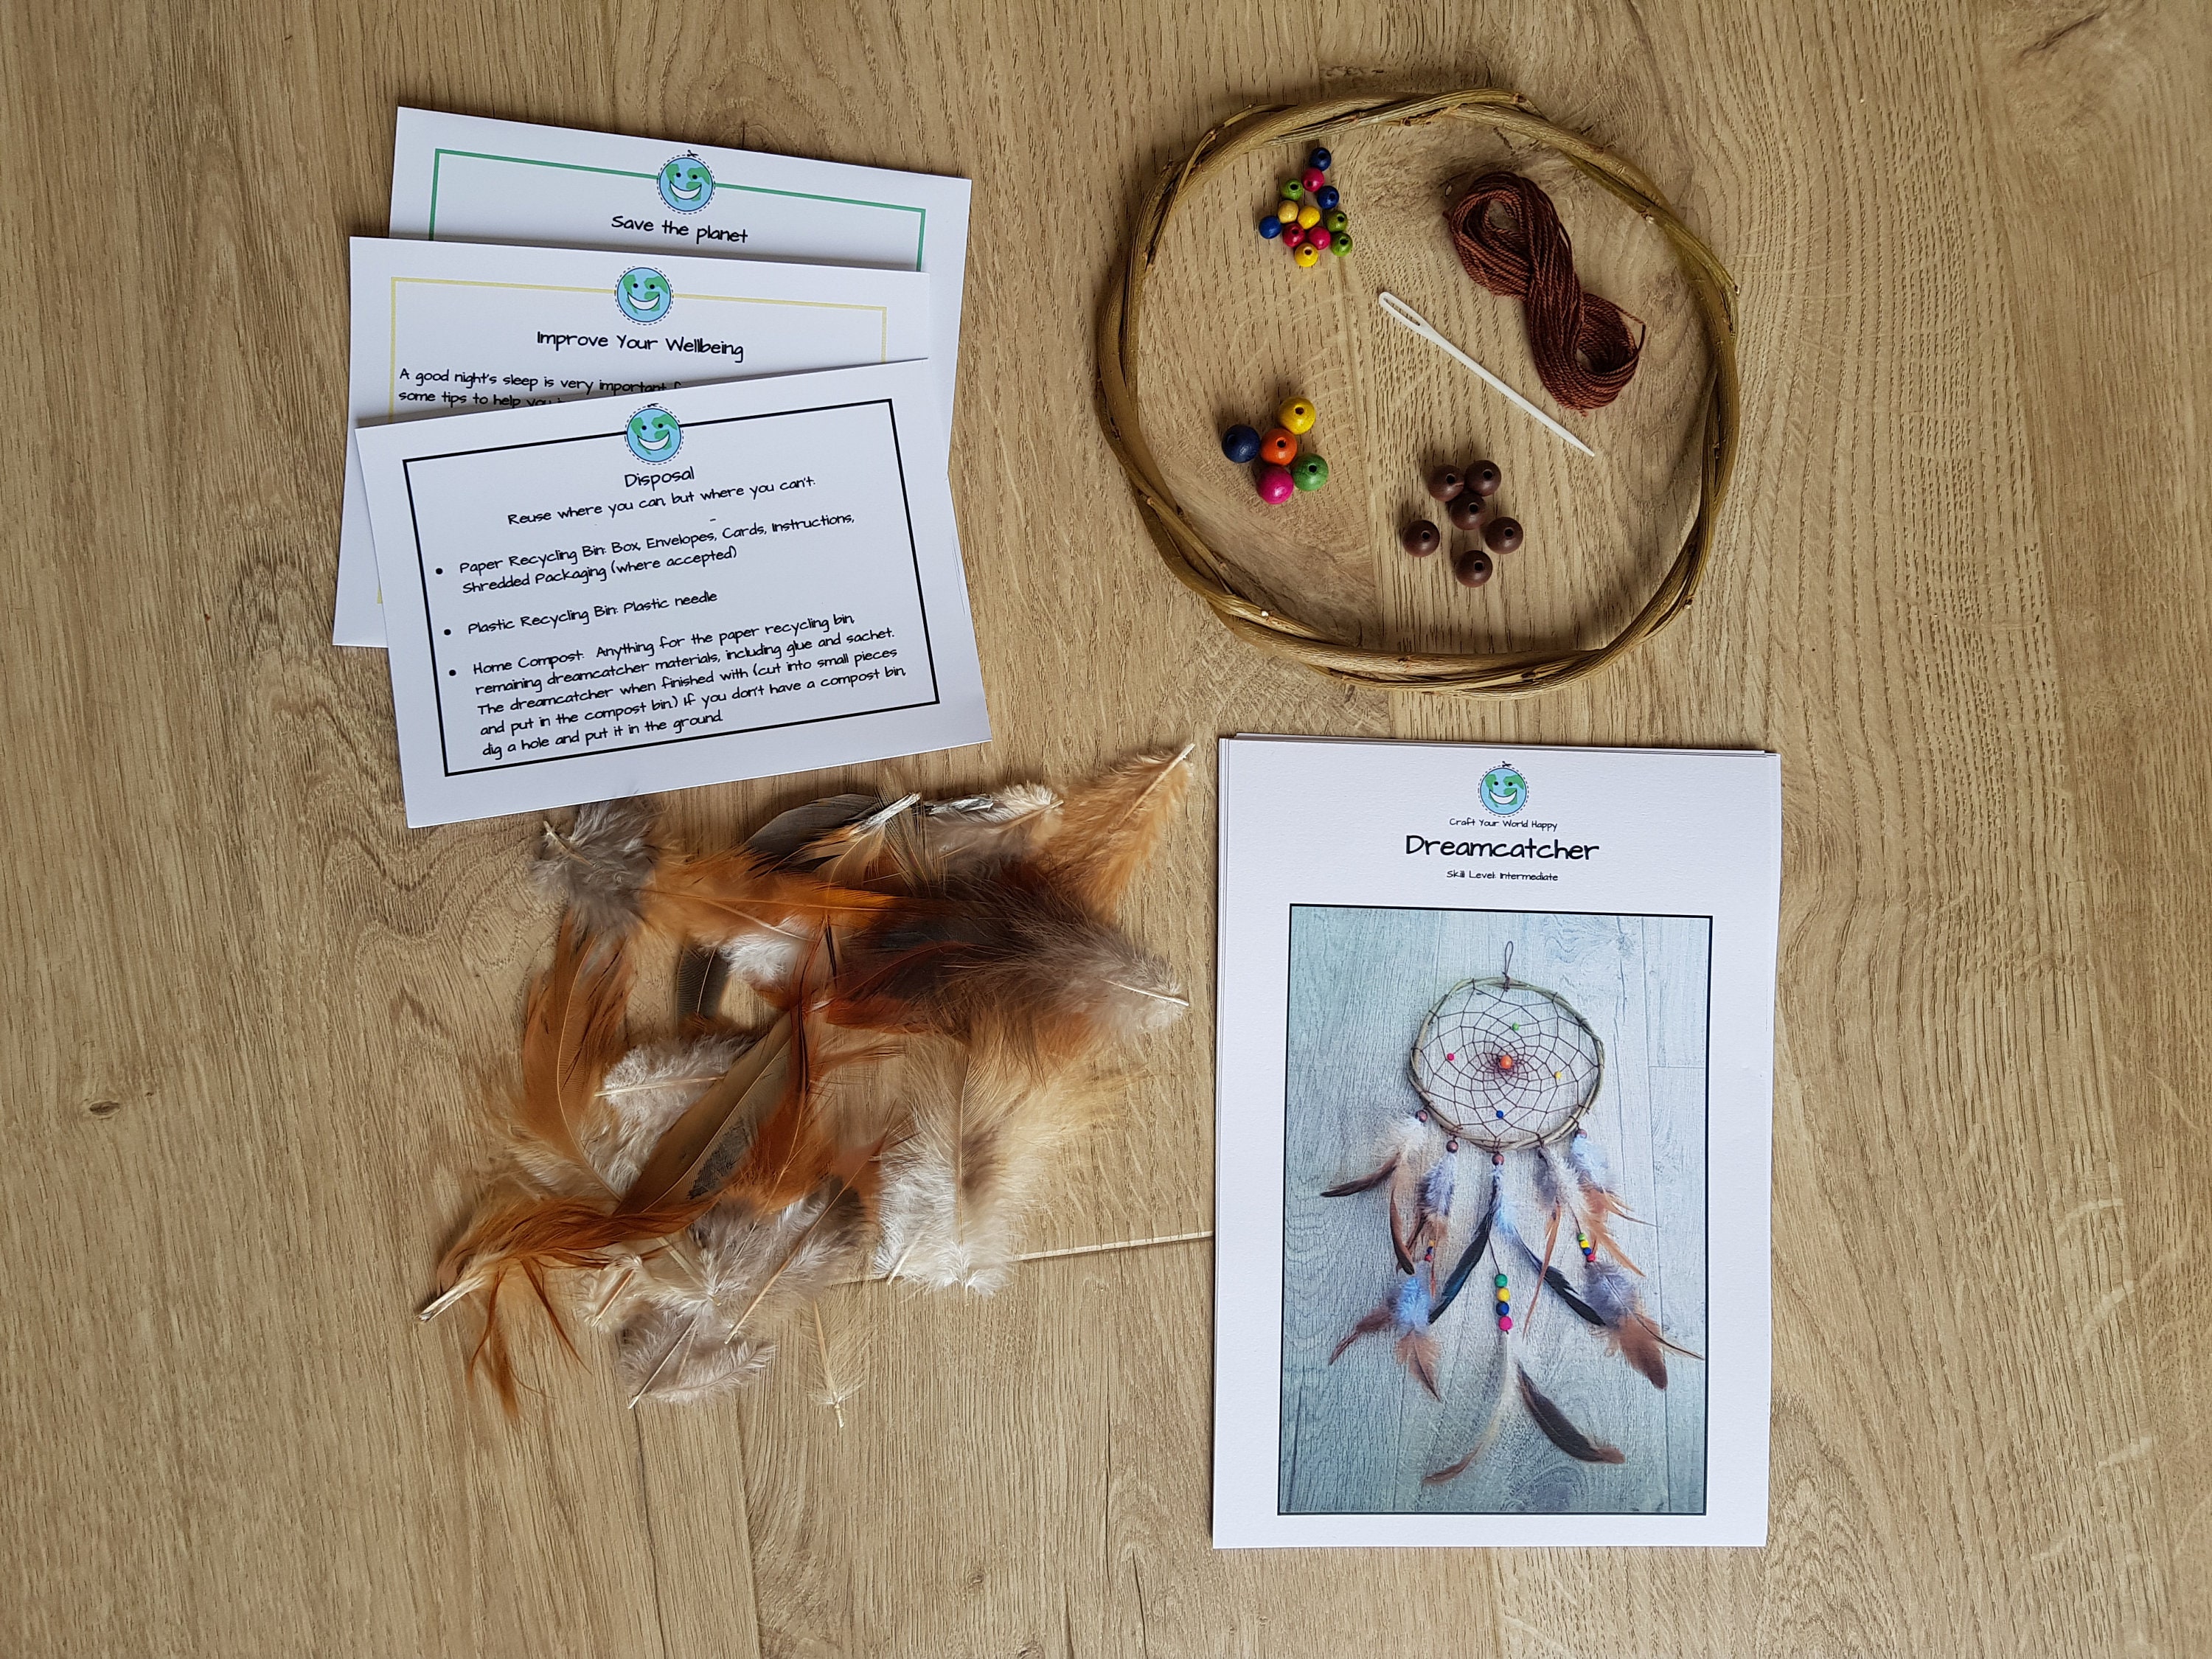 Dreamcatcher Craft Kit for Adults Eco and Wellbeing Craft Box DIY 